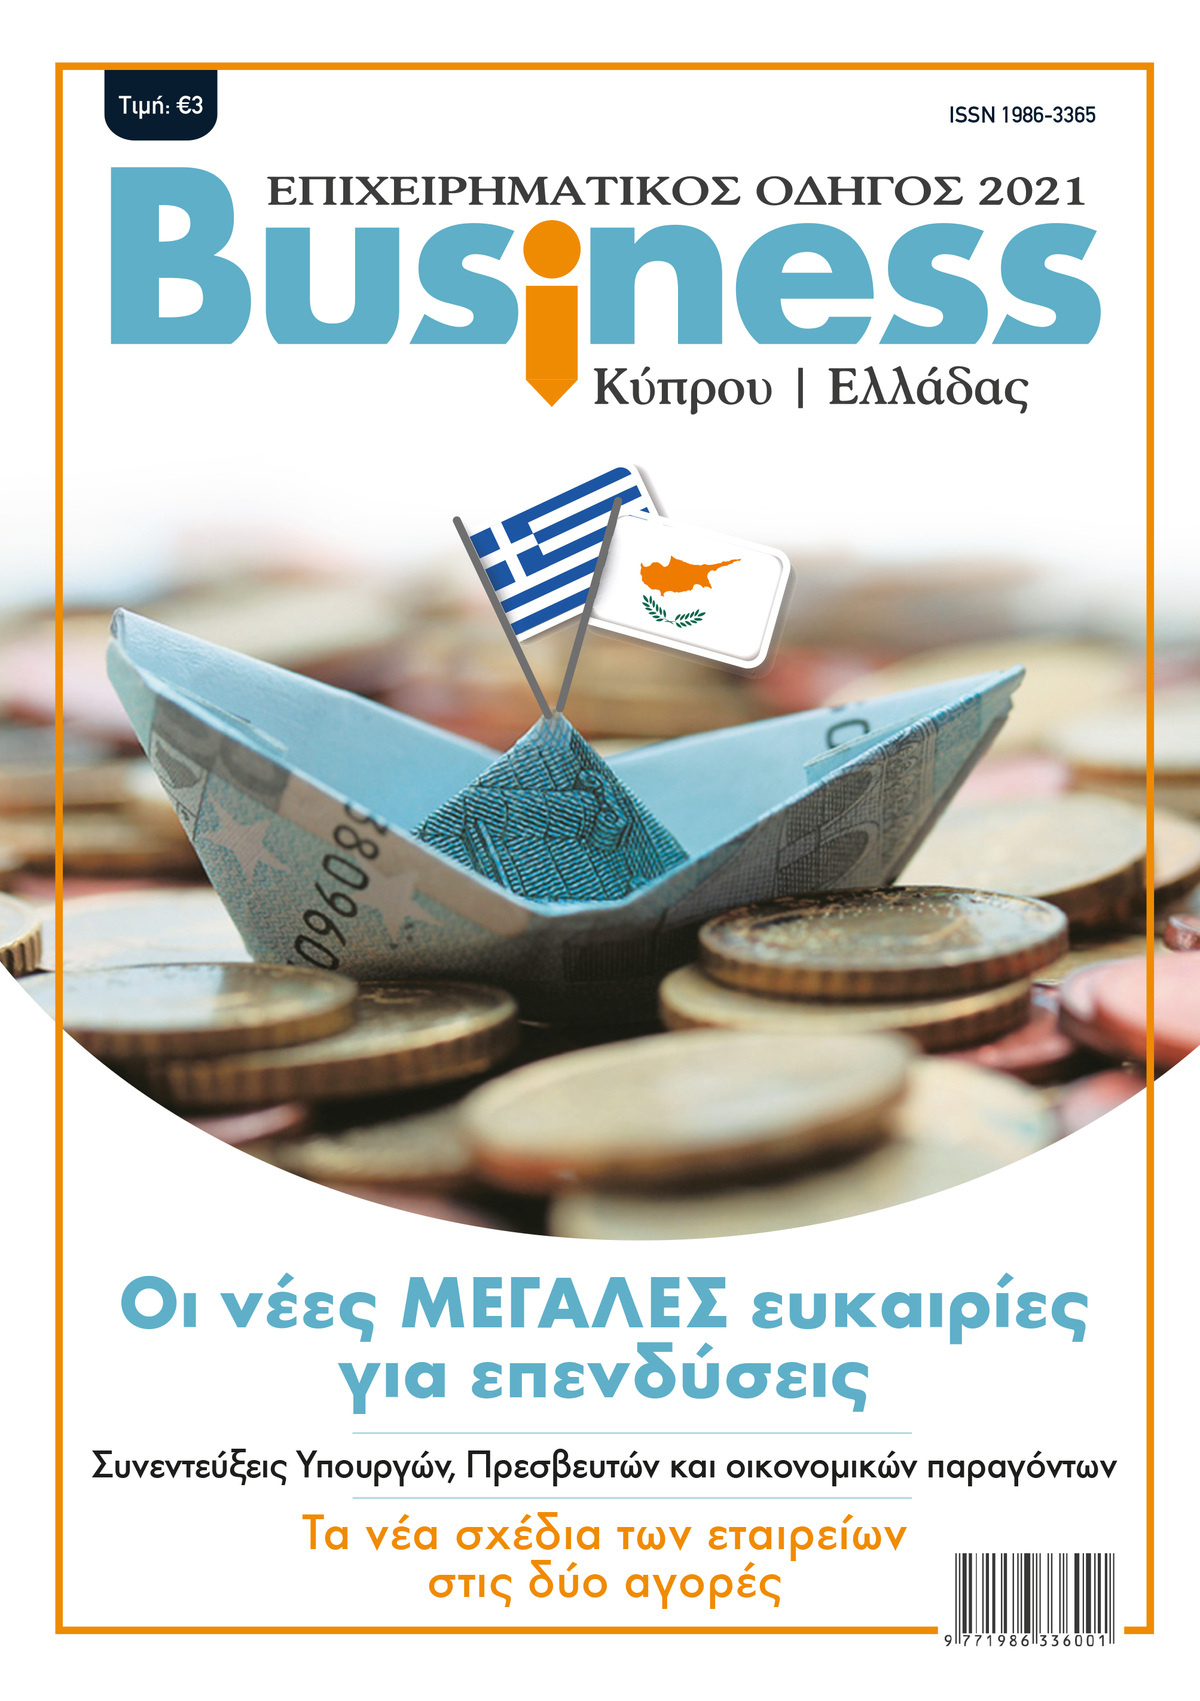 COVER BUSINESS 2021